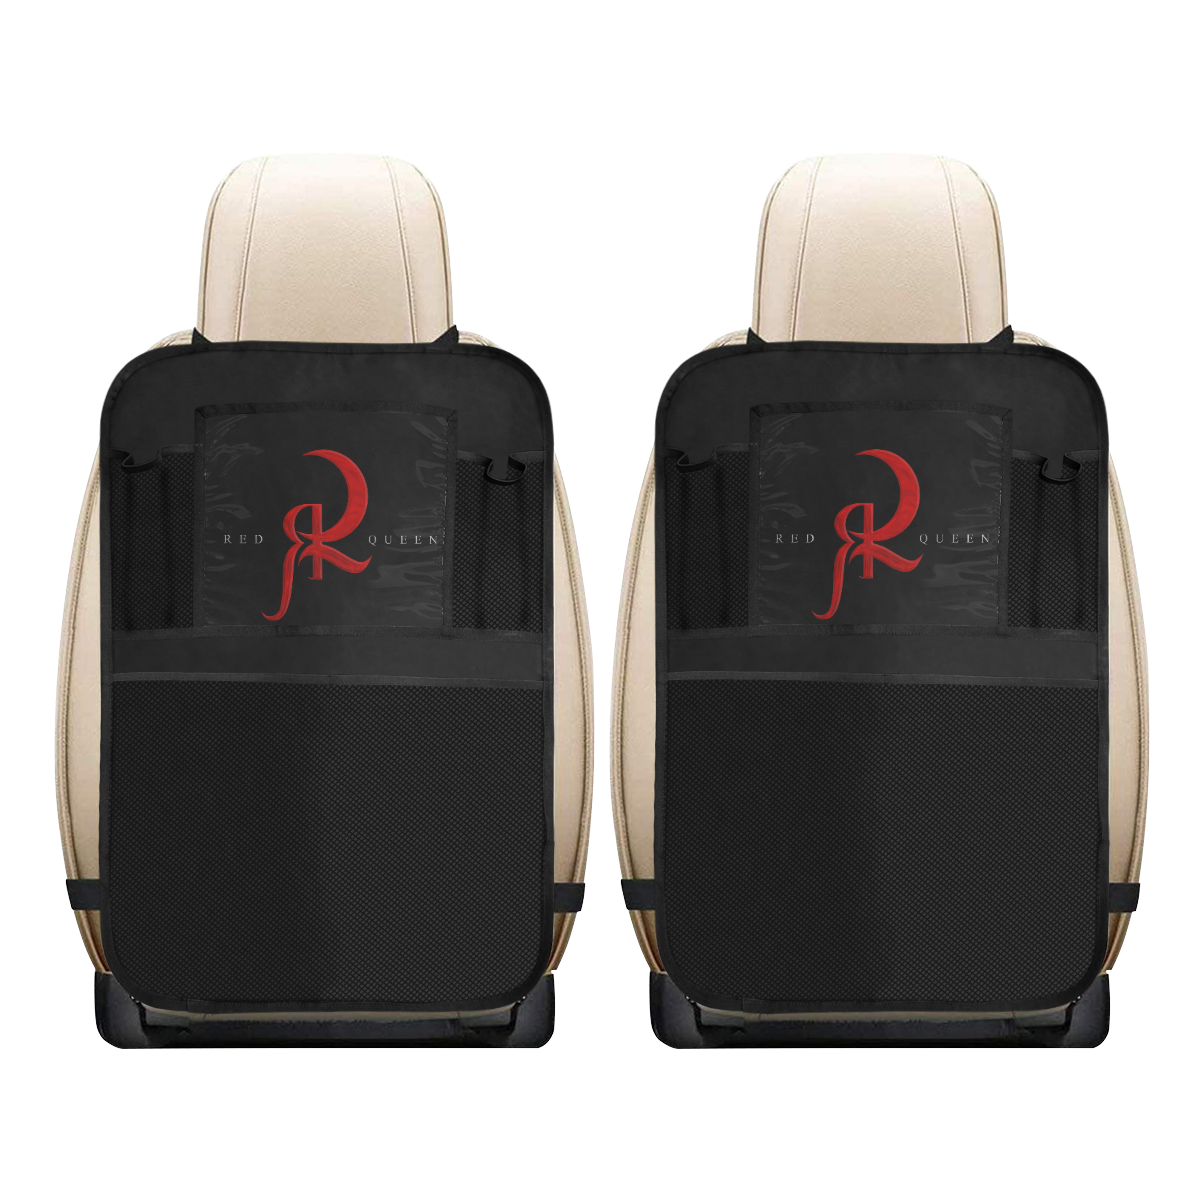 RED QUEEN LOGO Car Seat Back Organizer (2-Pack)